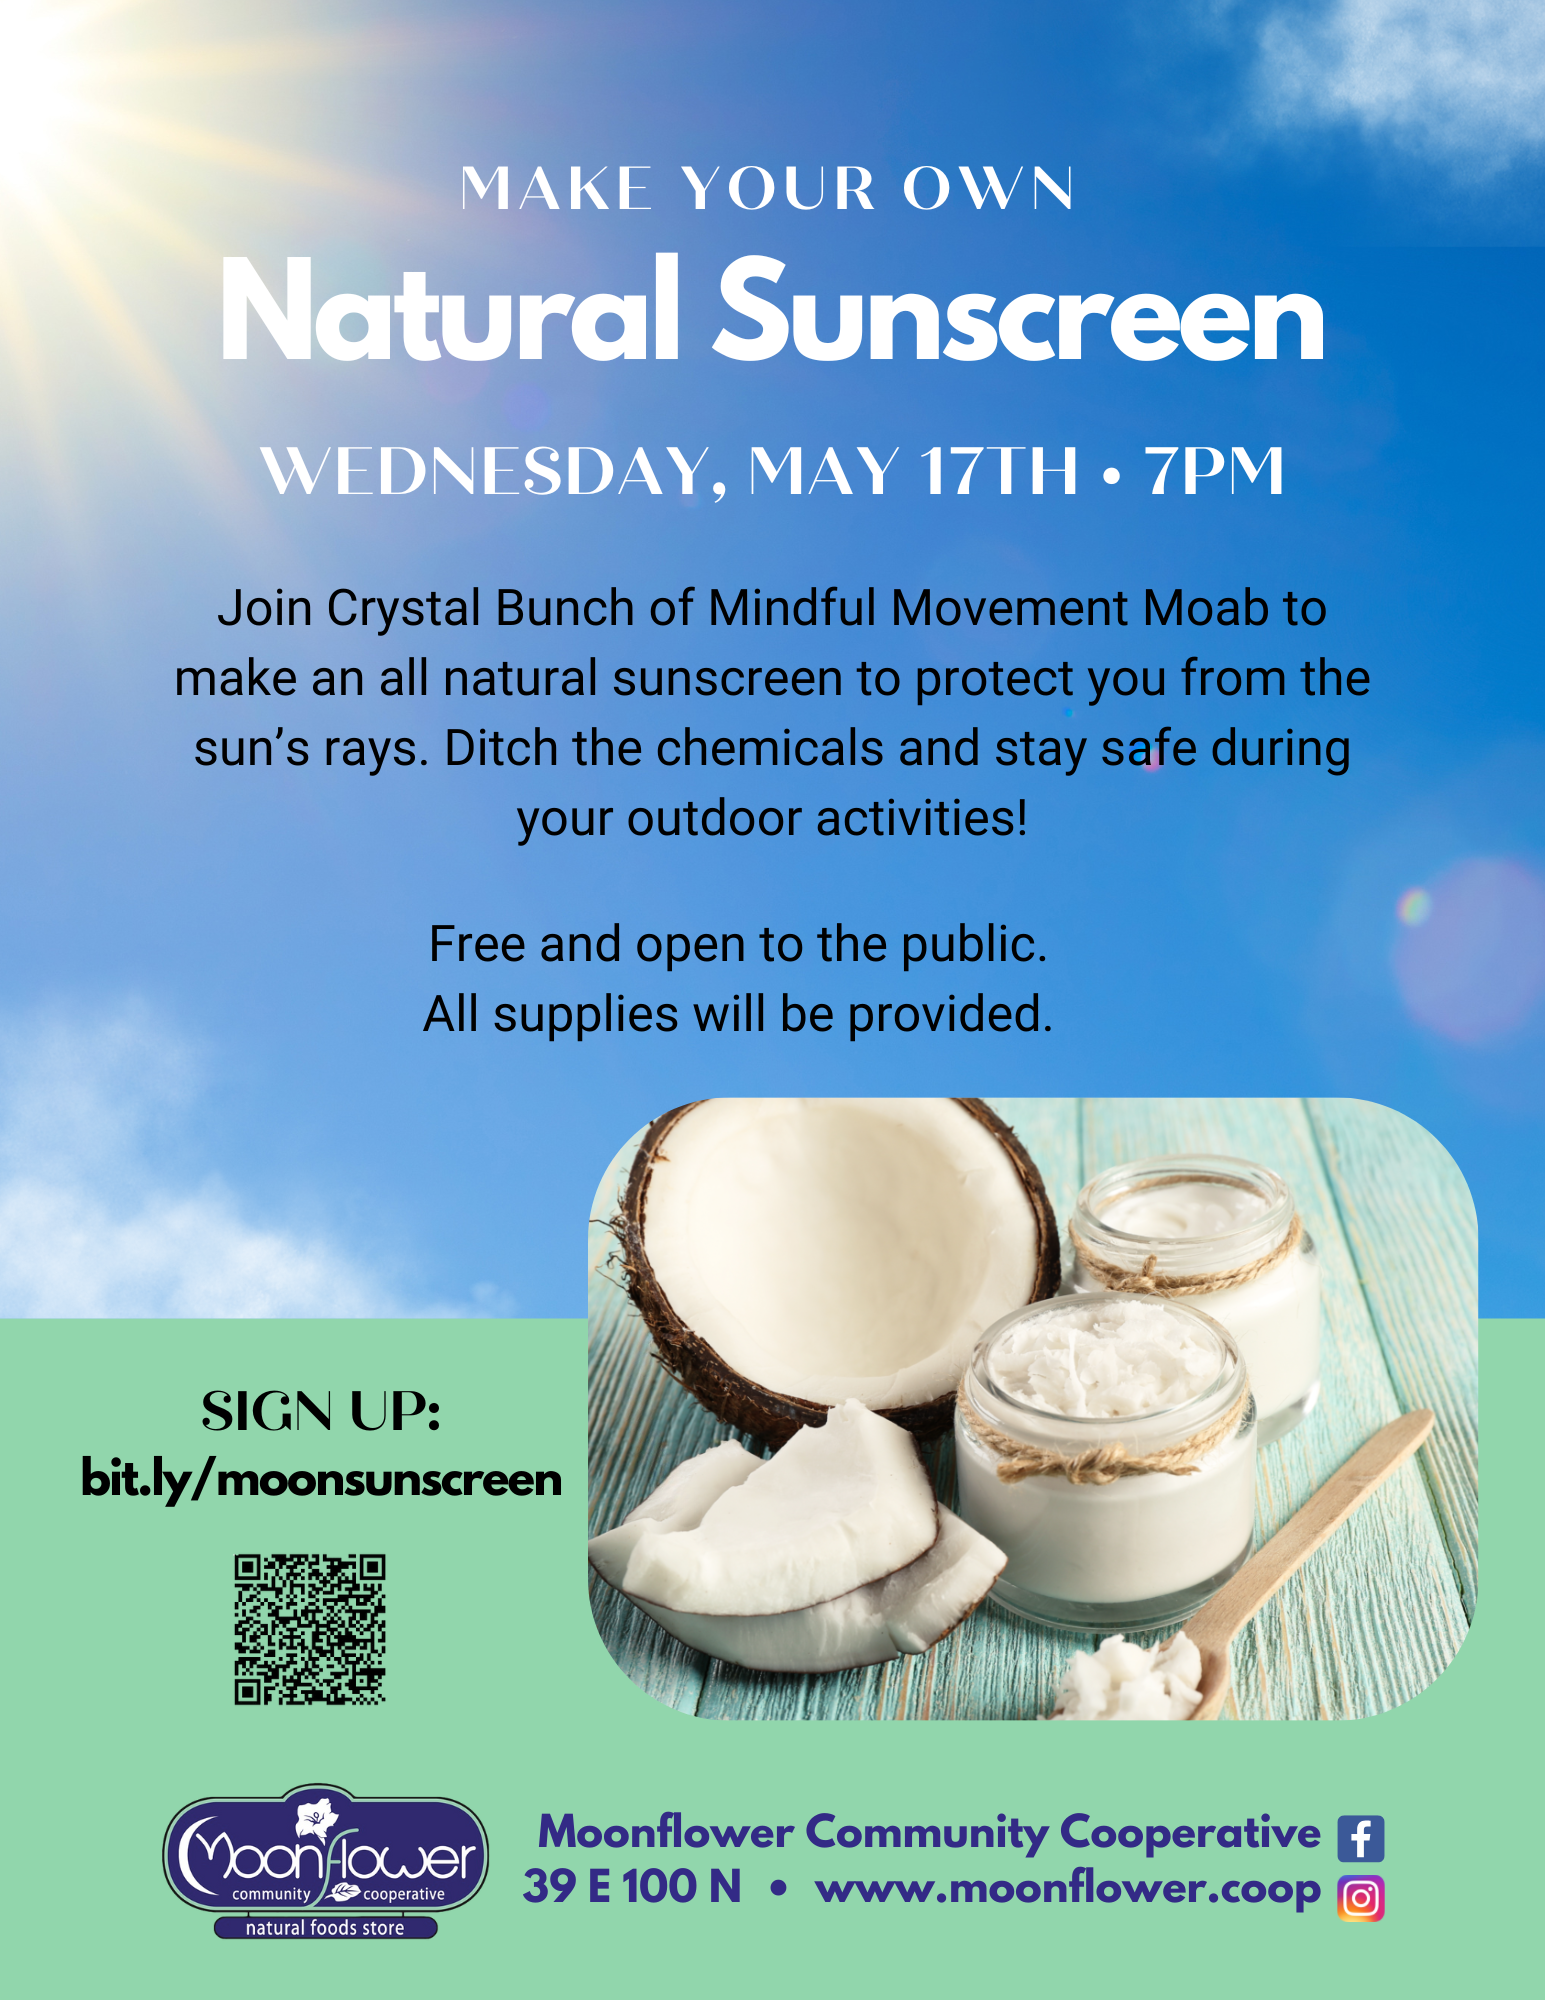 Make Your Own Natural Sunscreen Class